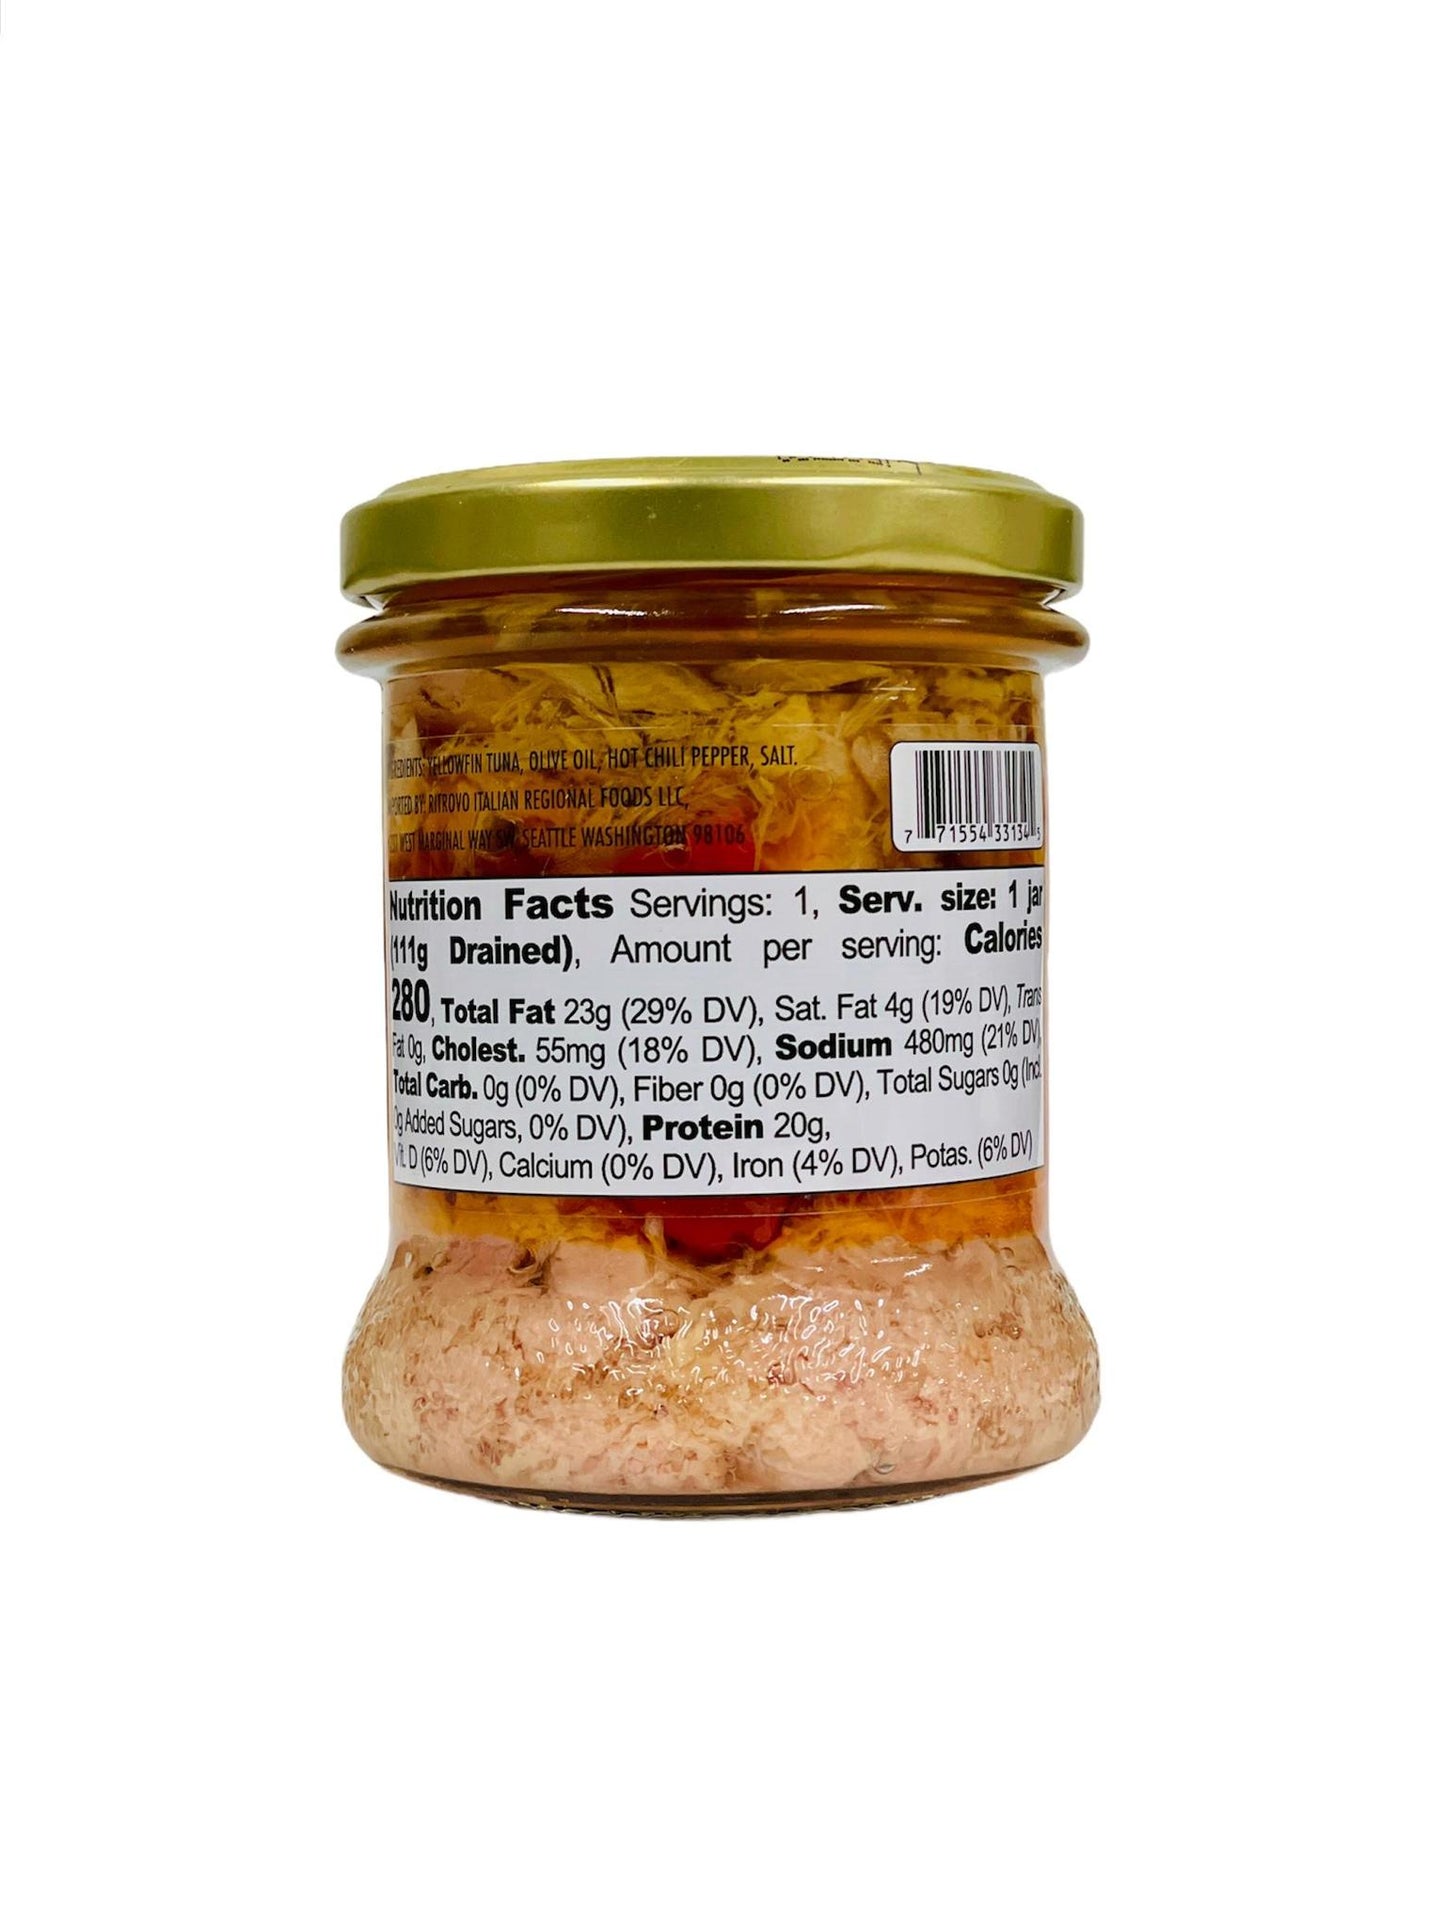 Ritrovo Selections Tuna Chunks with Hot Chili Pepper in Olive Oil, 6 oz